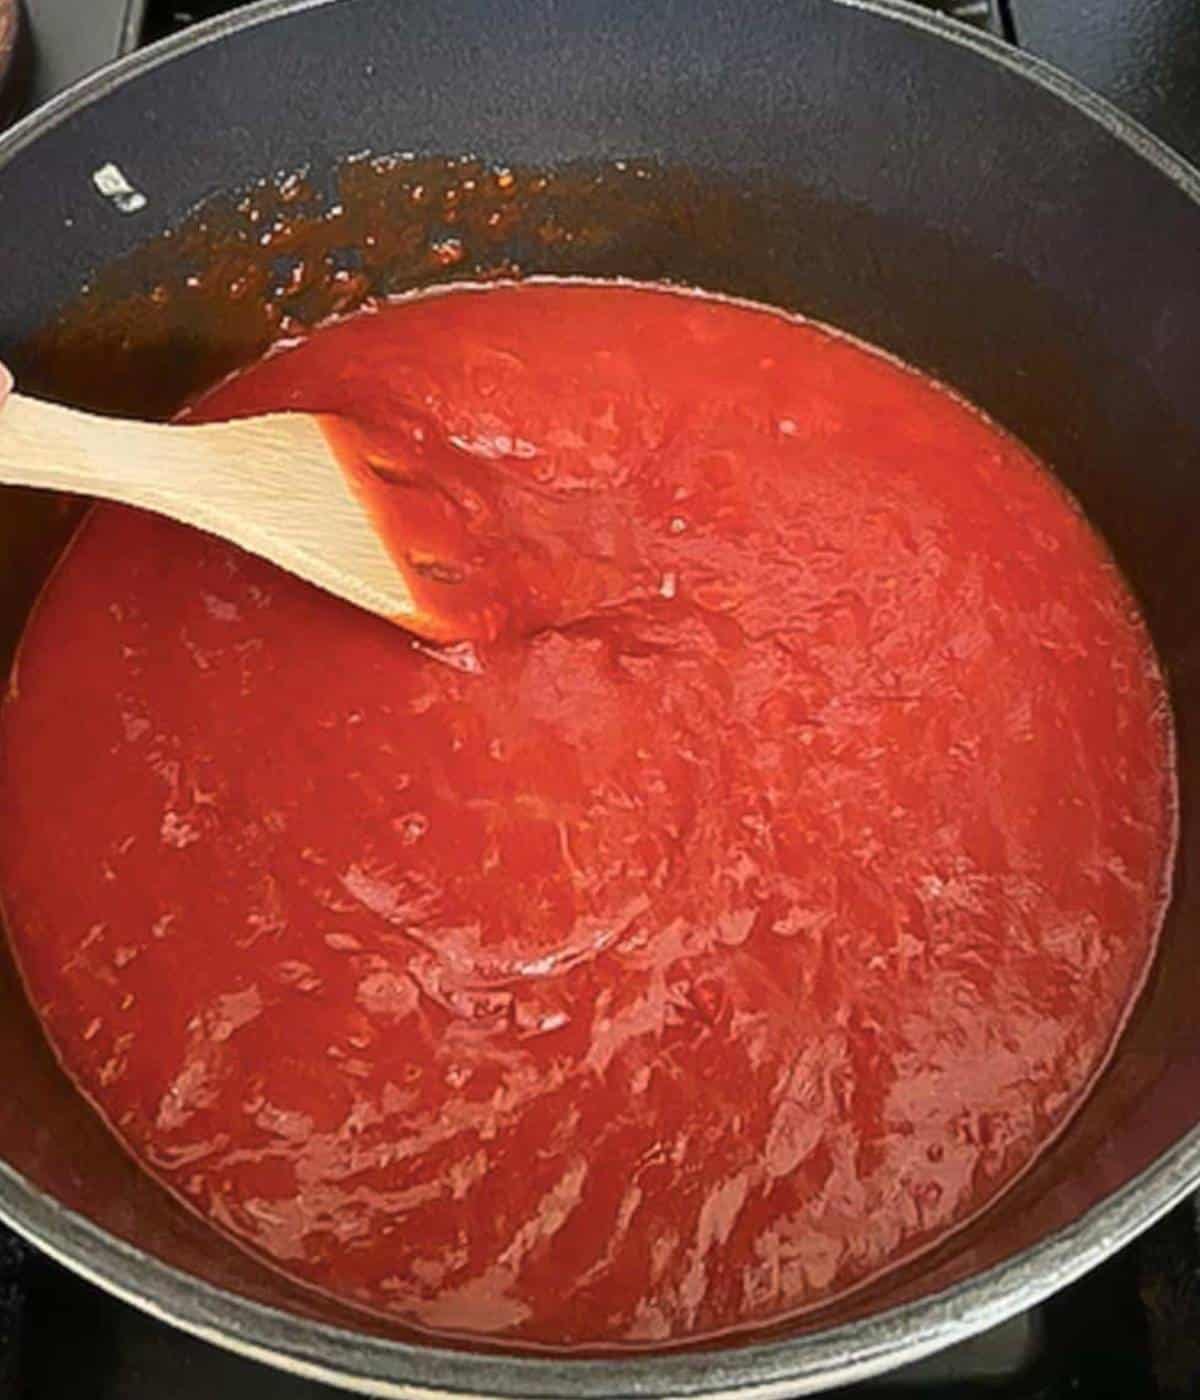 Stirring sauce with wooden spoon.